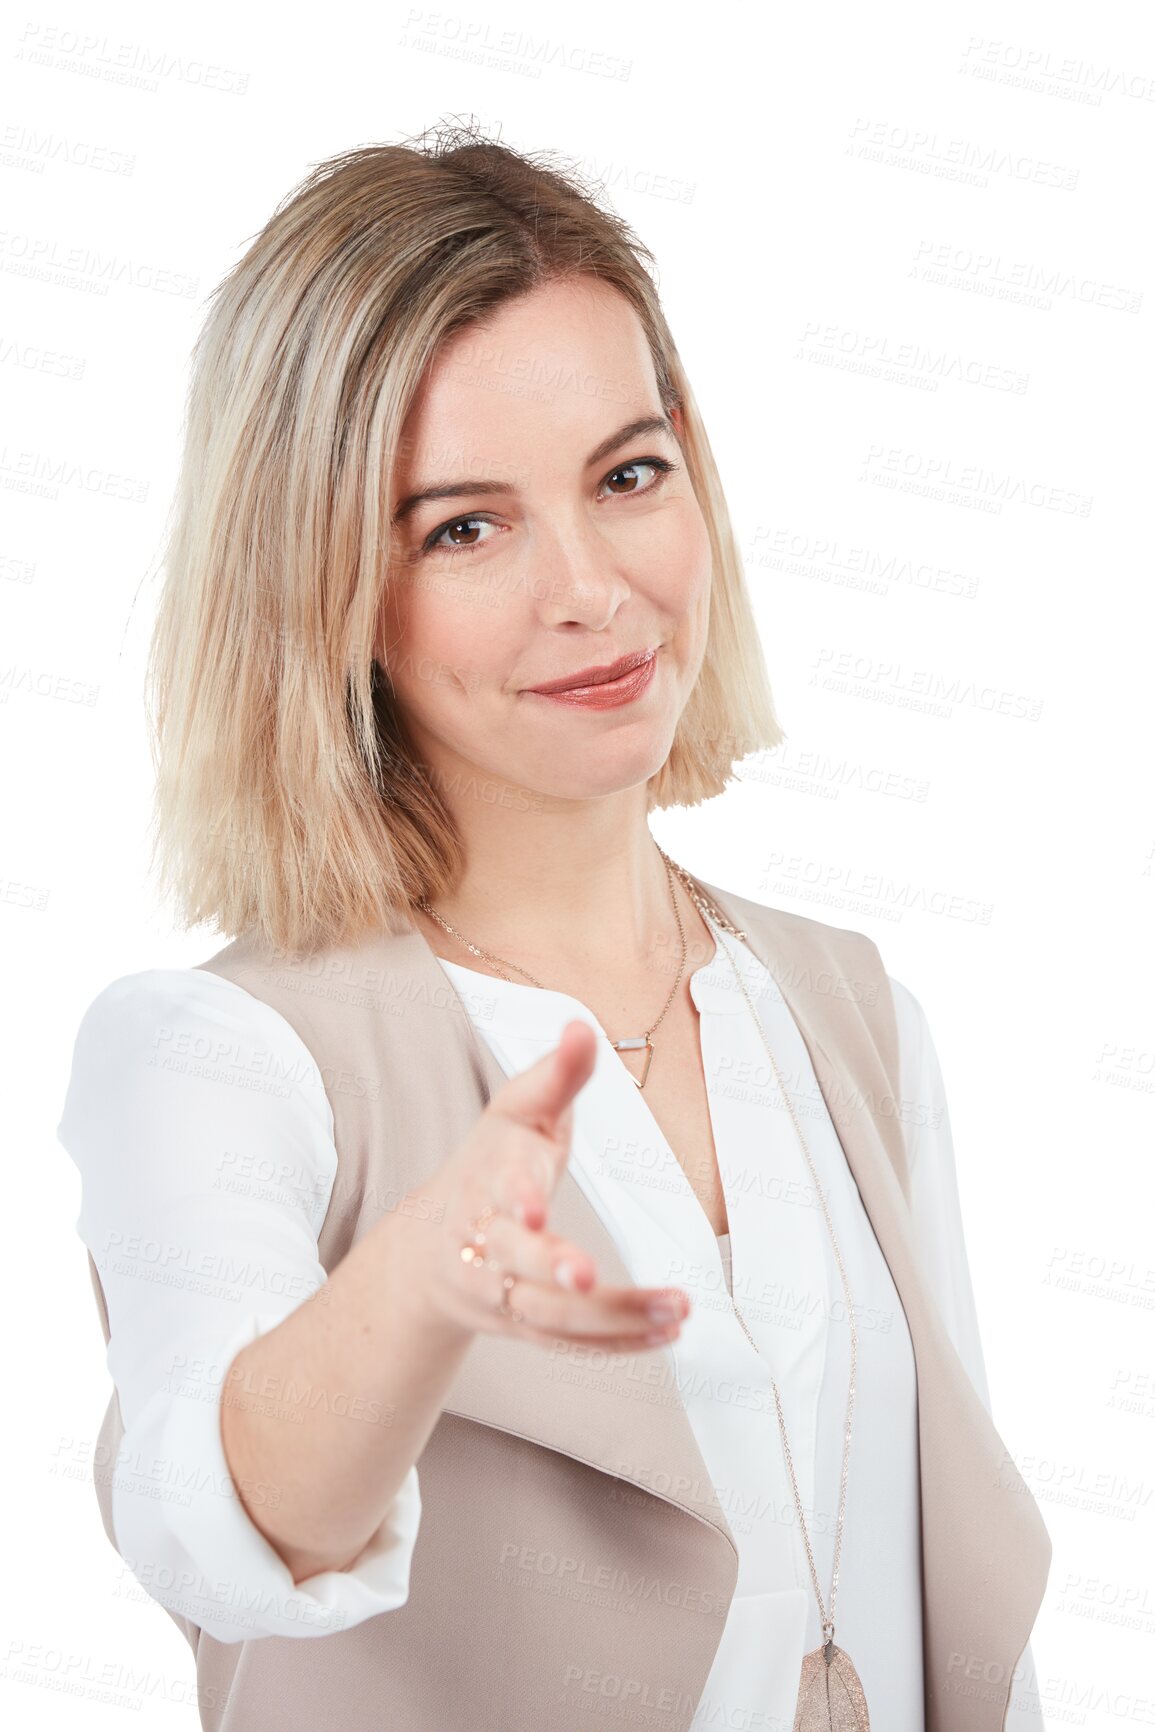 Buy stock photo Happy woman, professional portrait and hand shake gesture for thank you, business deal success or B2C contract agreement. HR, recruitment and hiring person isolated on transparent, png background
